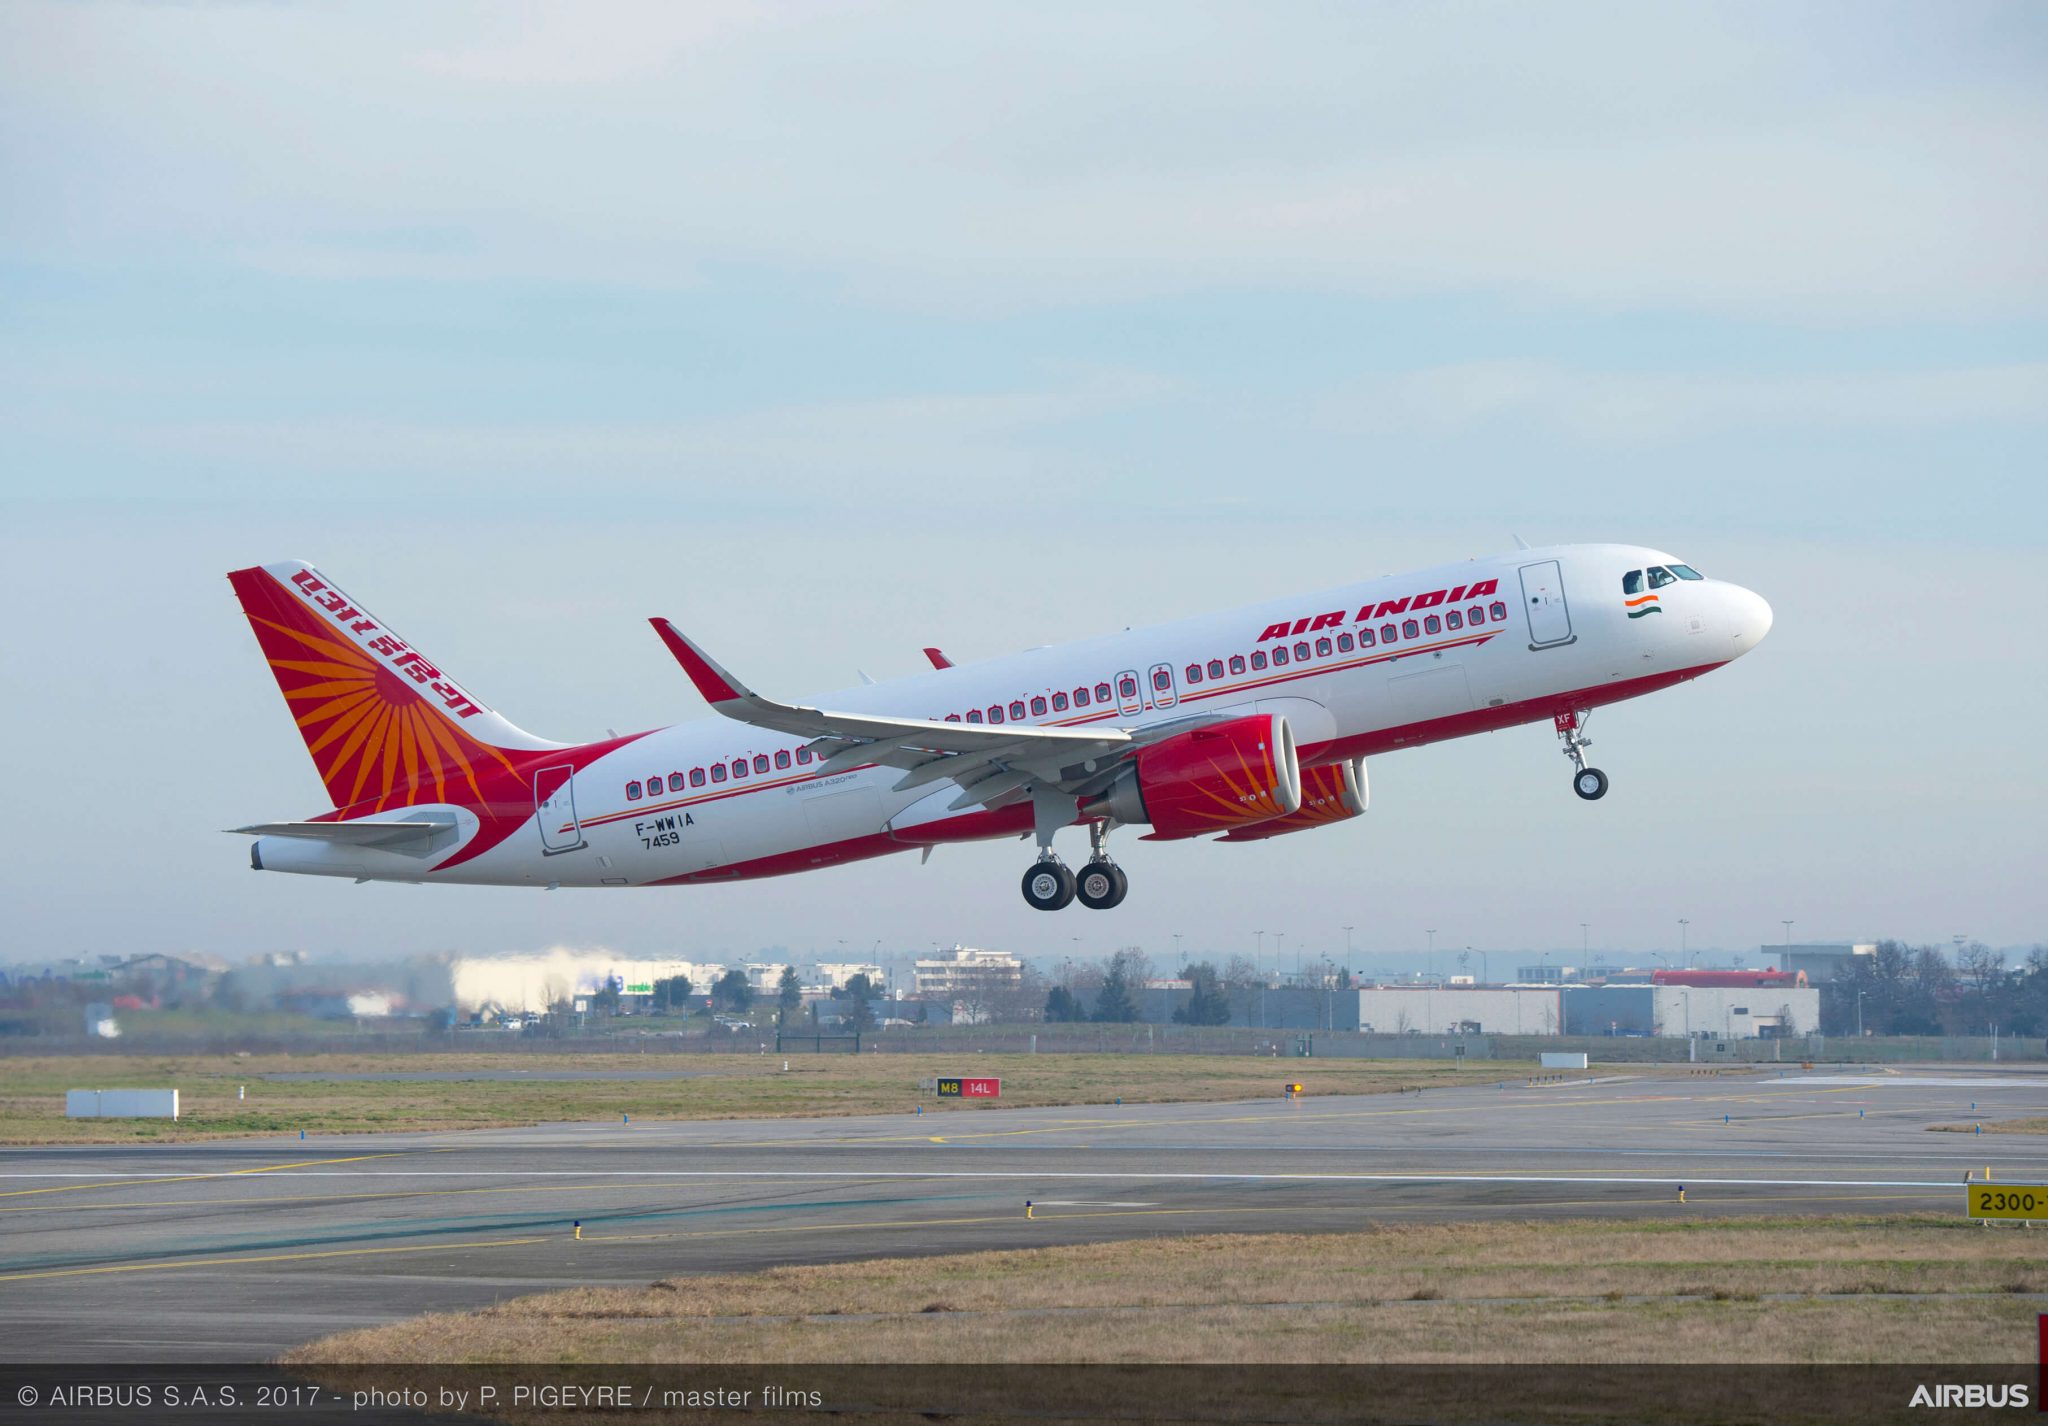 Air India seals the historic order with 250 Airbus and 220 Boeing jets